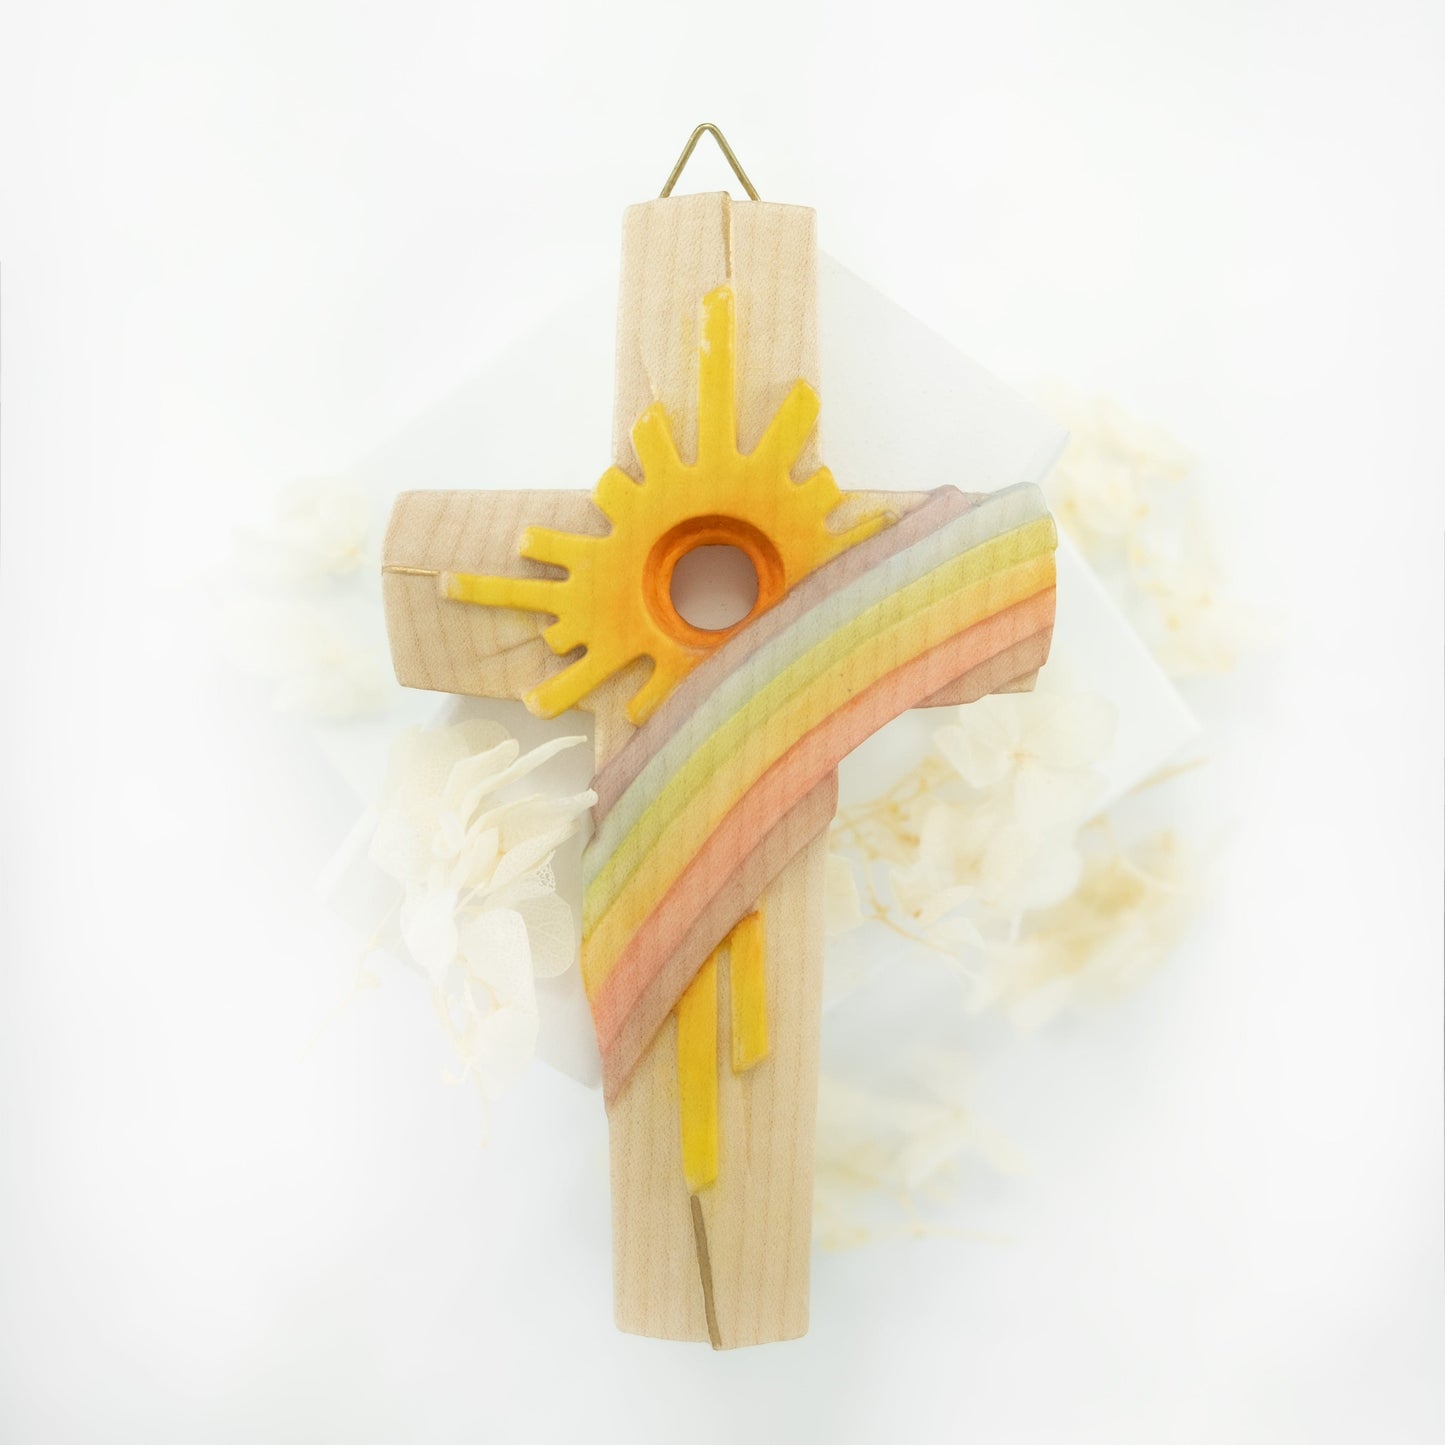 MONDO CATTOLICO 15 cm (5.91 in) Wooden Cross With Sun and Rainbow